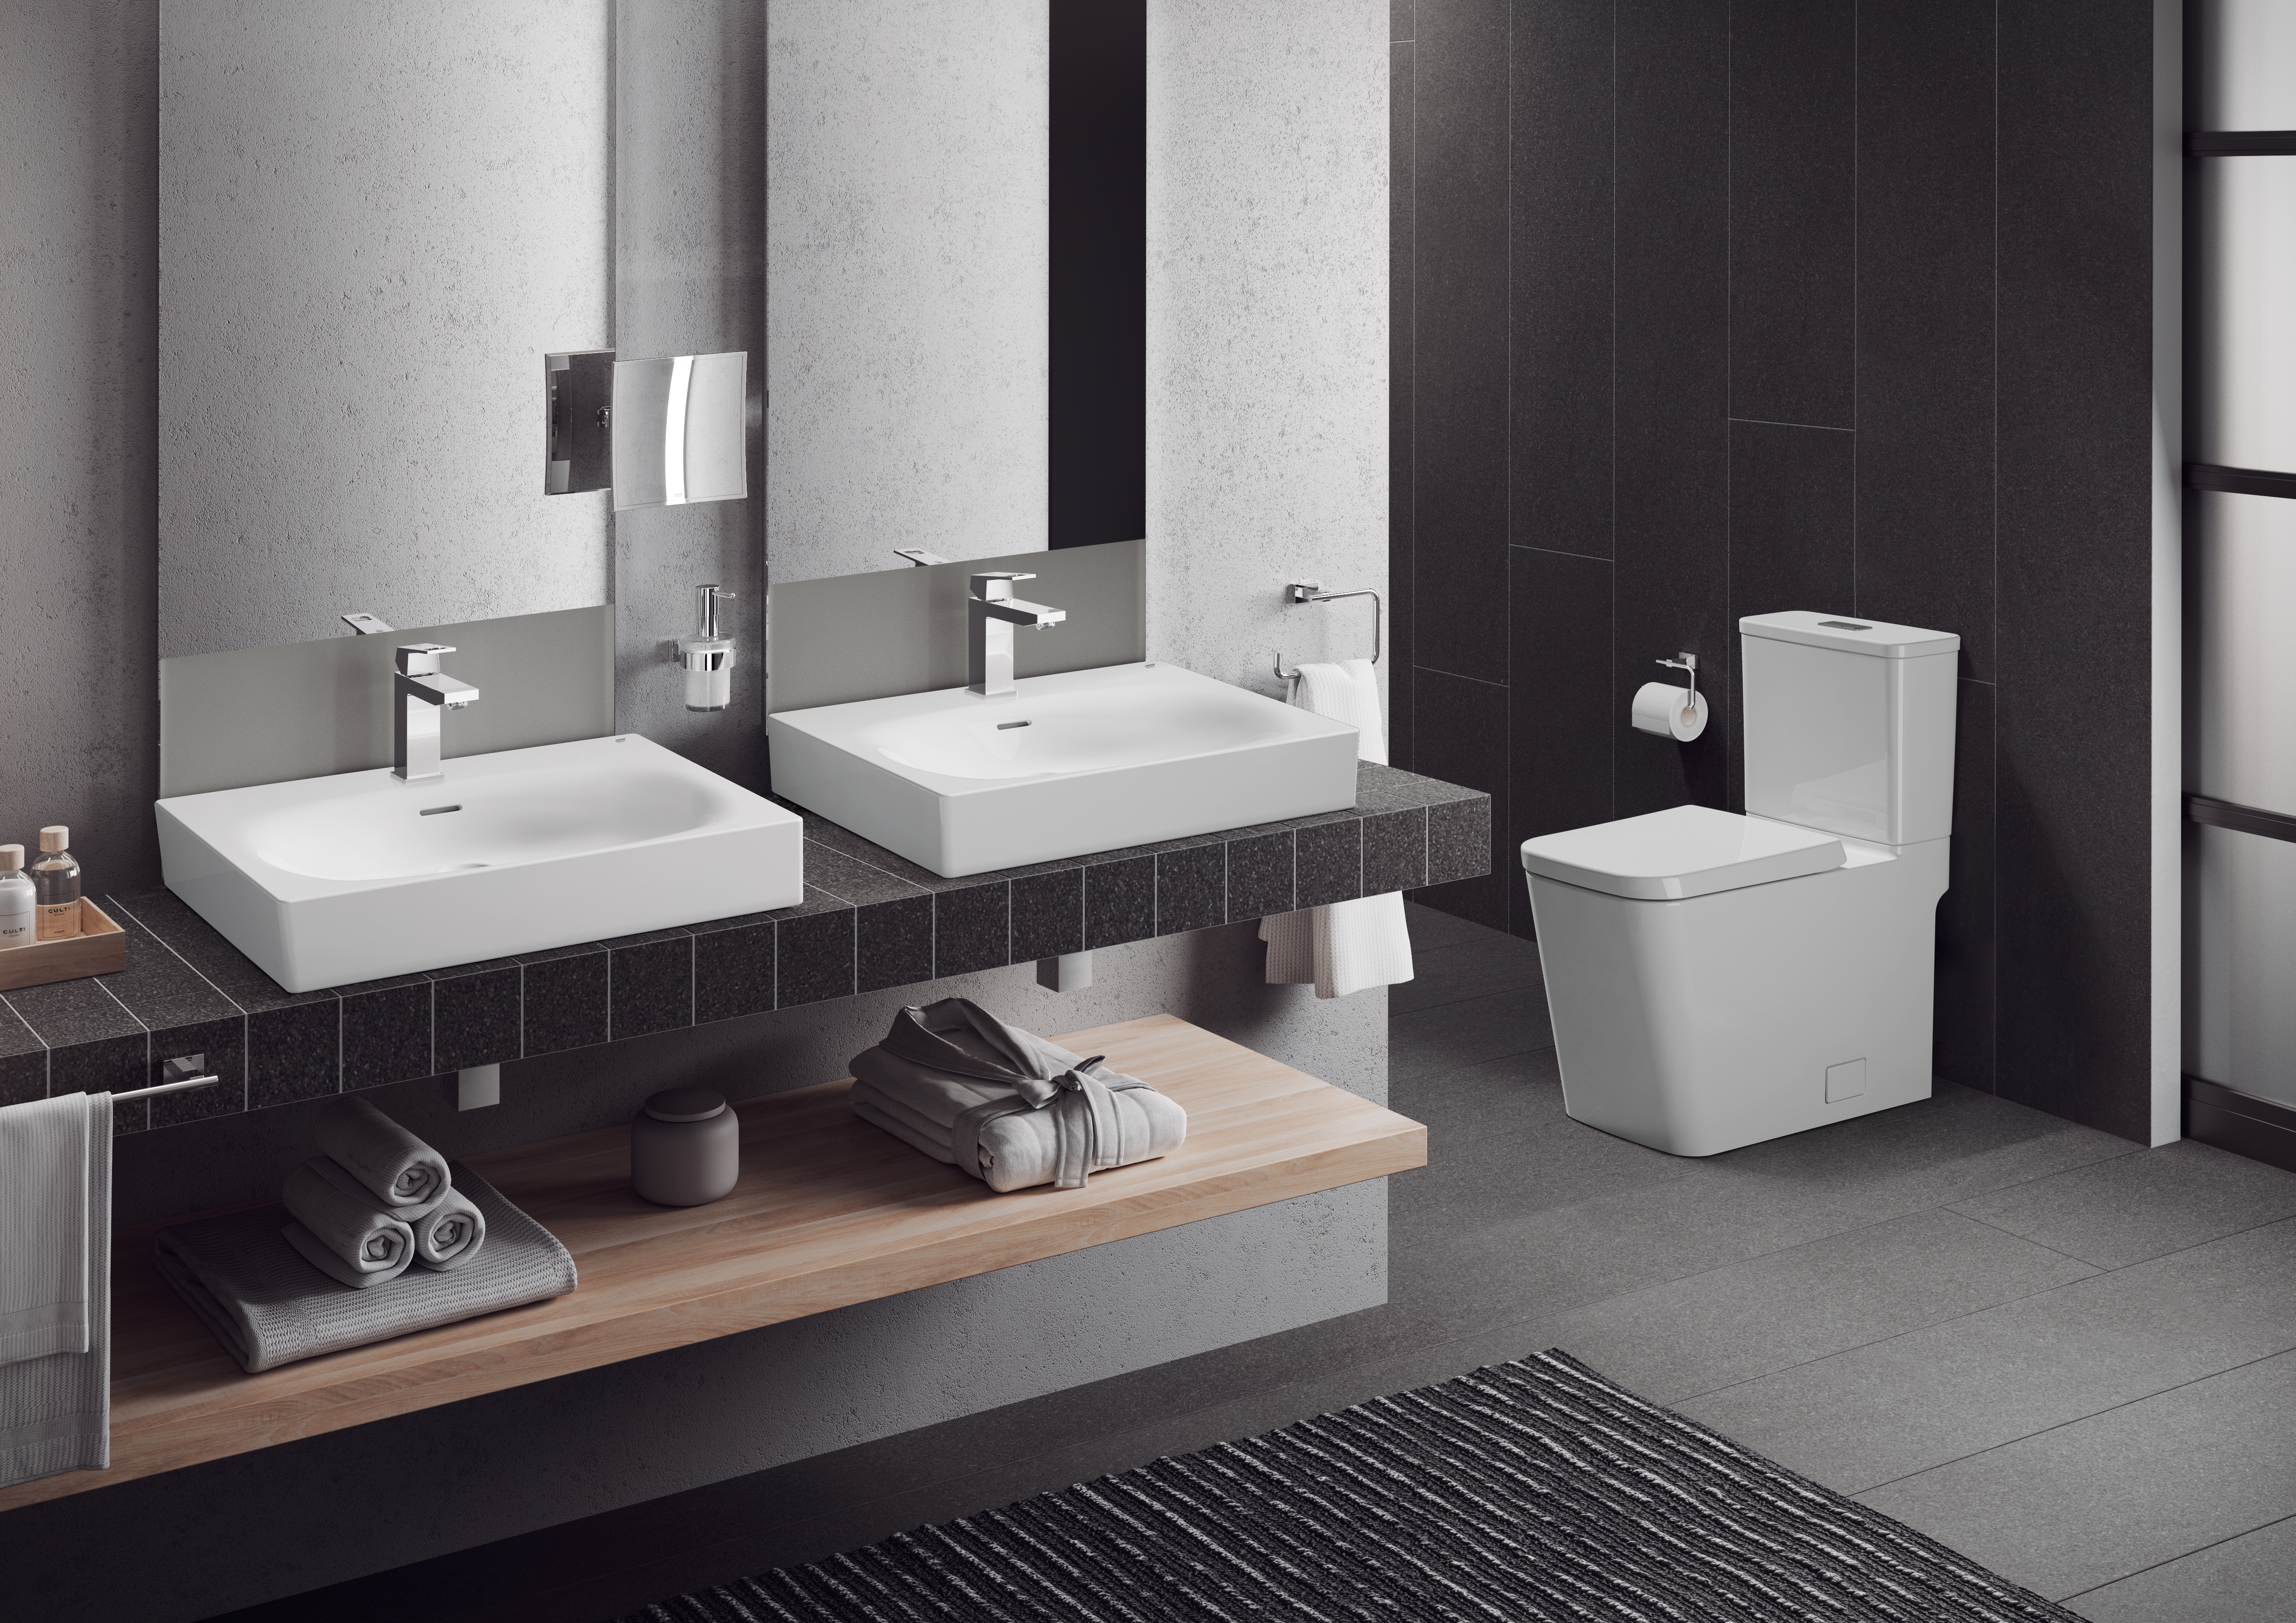 Two-Piece Dual Flush Right Height Elongated Toilet With Seat